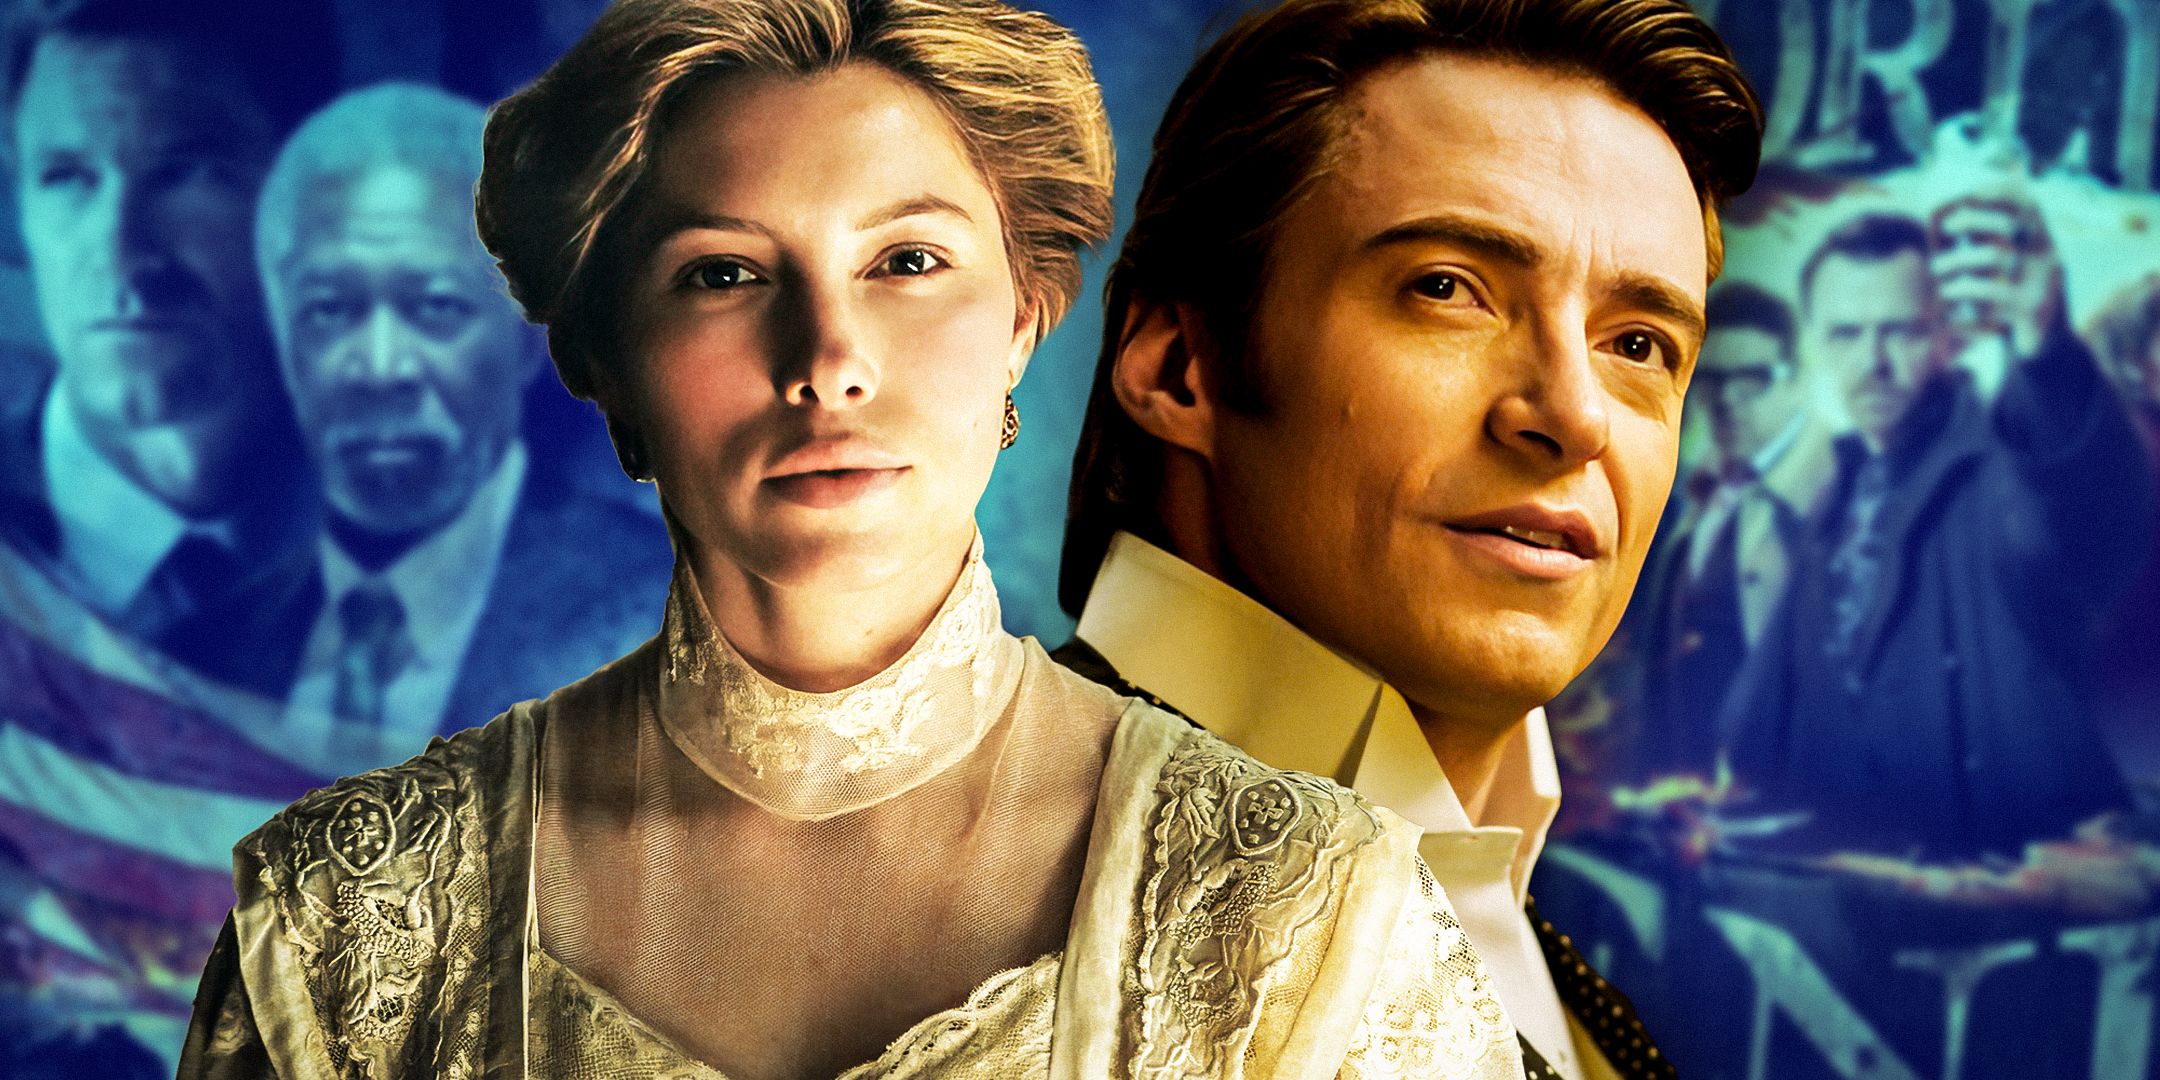 Jessica-Bie-as-Sophie-from-The-Illusionist-and-Hugh-Jackman-as-Robert-Angier-from-The-Prestige